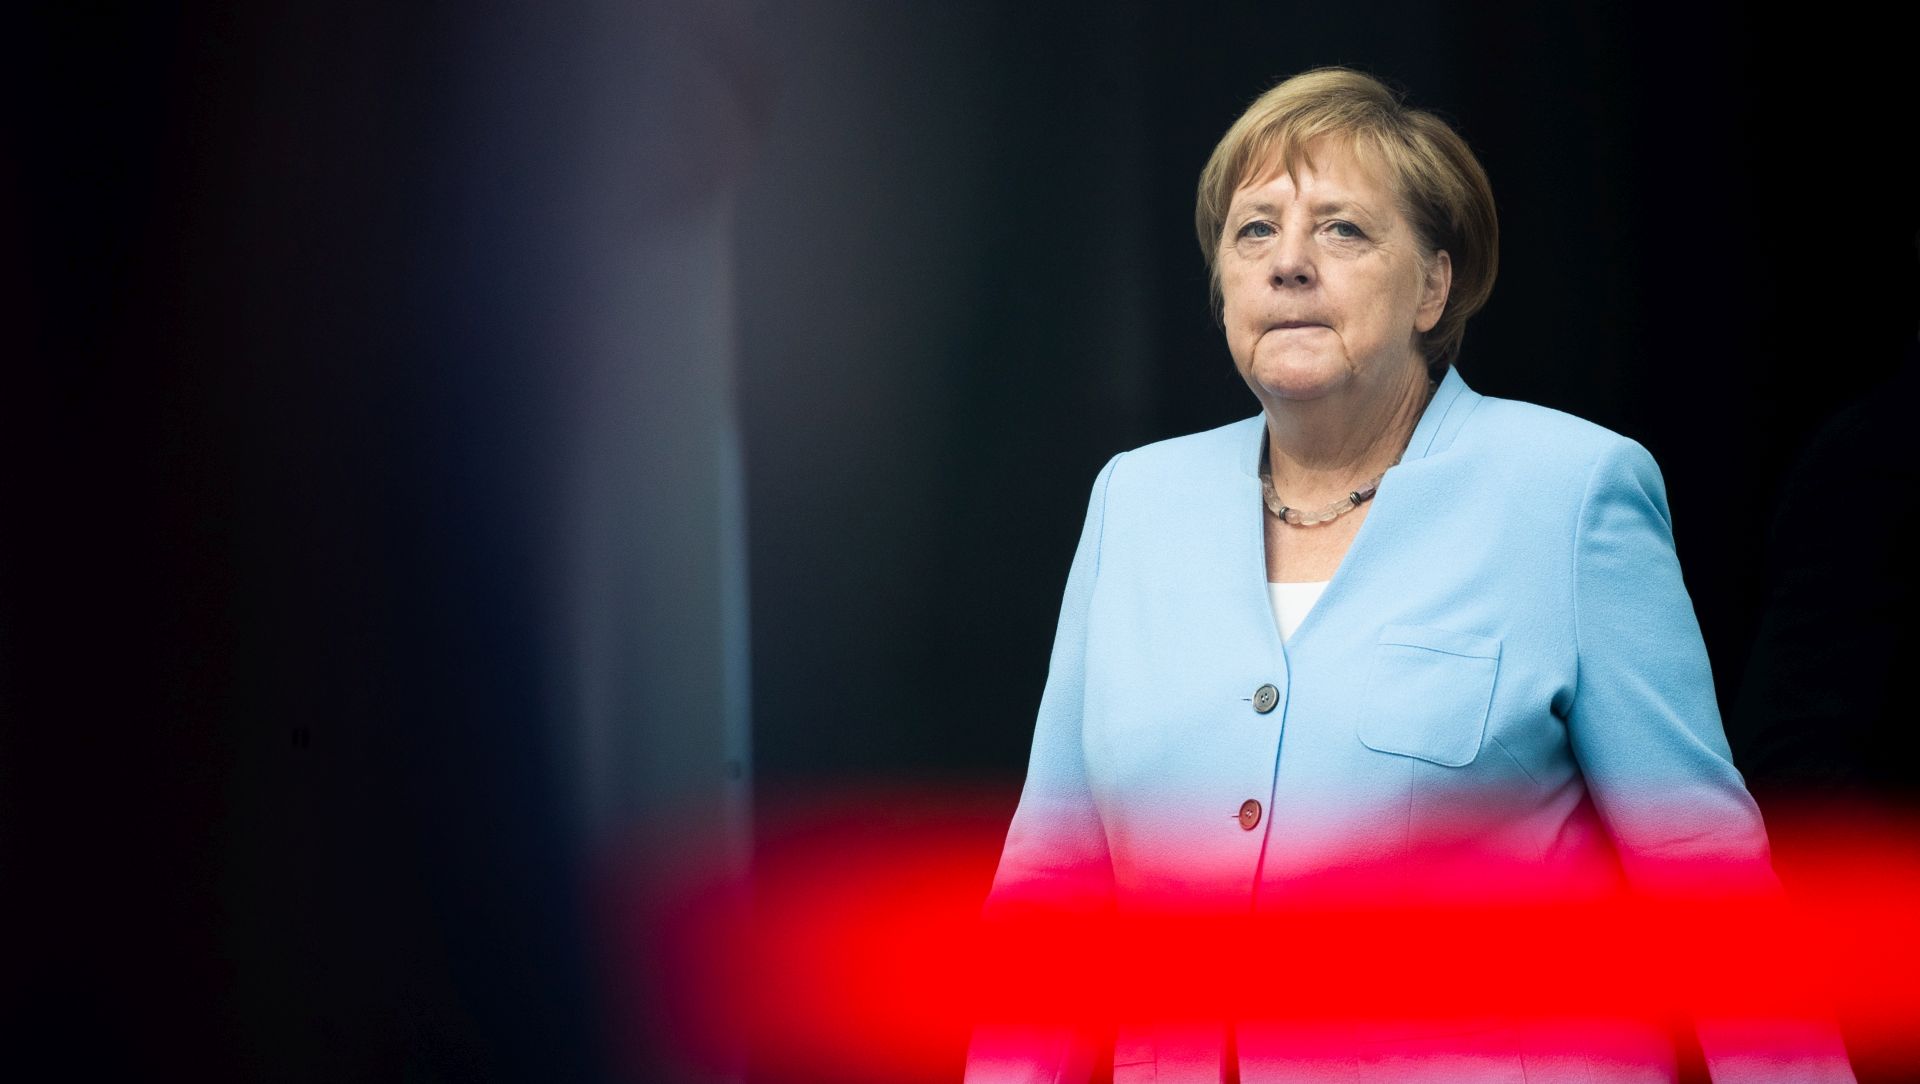 epa07772775 German Chancellor Angela Merkel prior to a reception with military honors at the Chancellery in Berlin, Germany, 14 August 2019. President of the Republic of Lithuania, Gitanas Nauseda visits the German capital to discuss bilateral issues.  EPA/HAYOUNG JEON